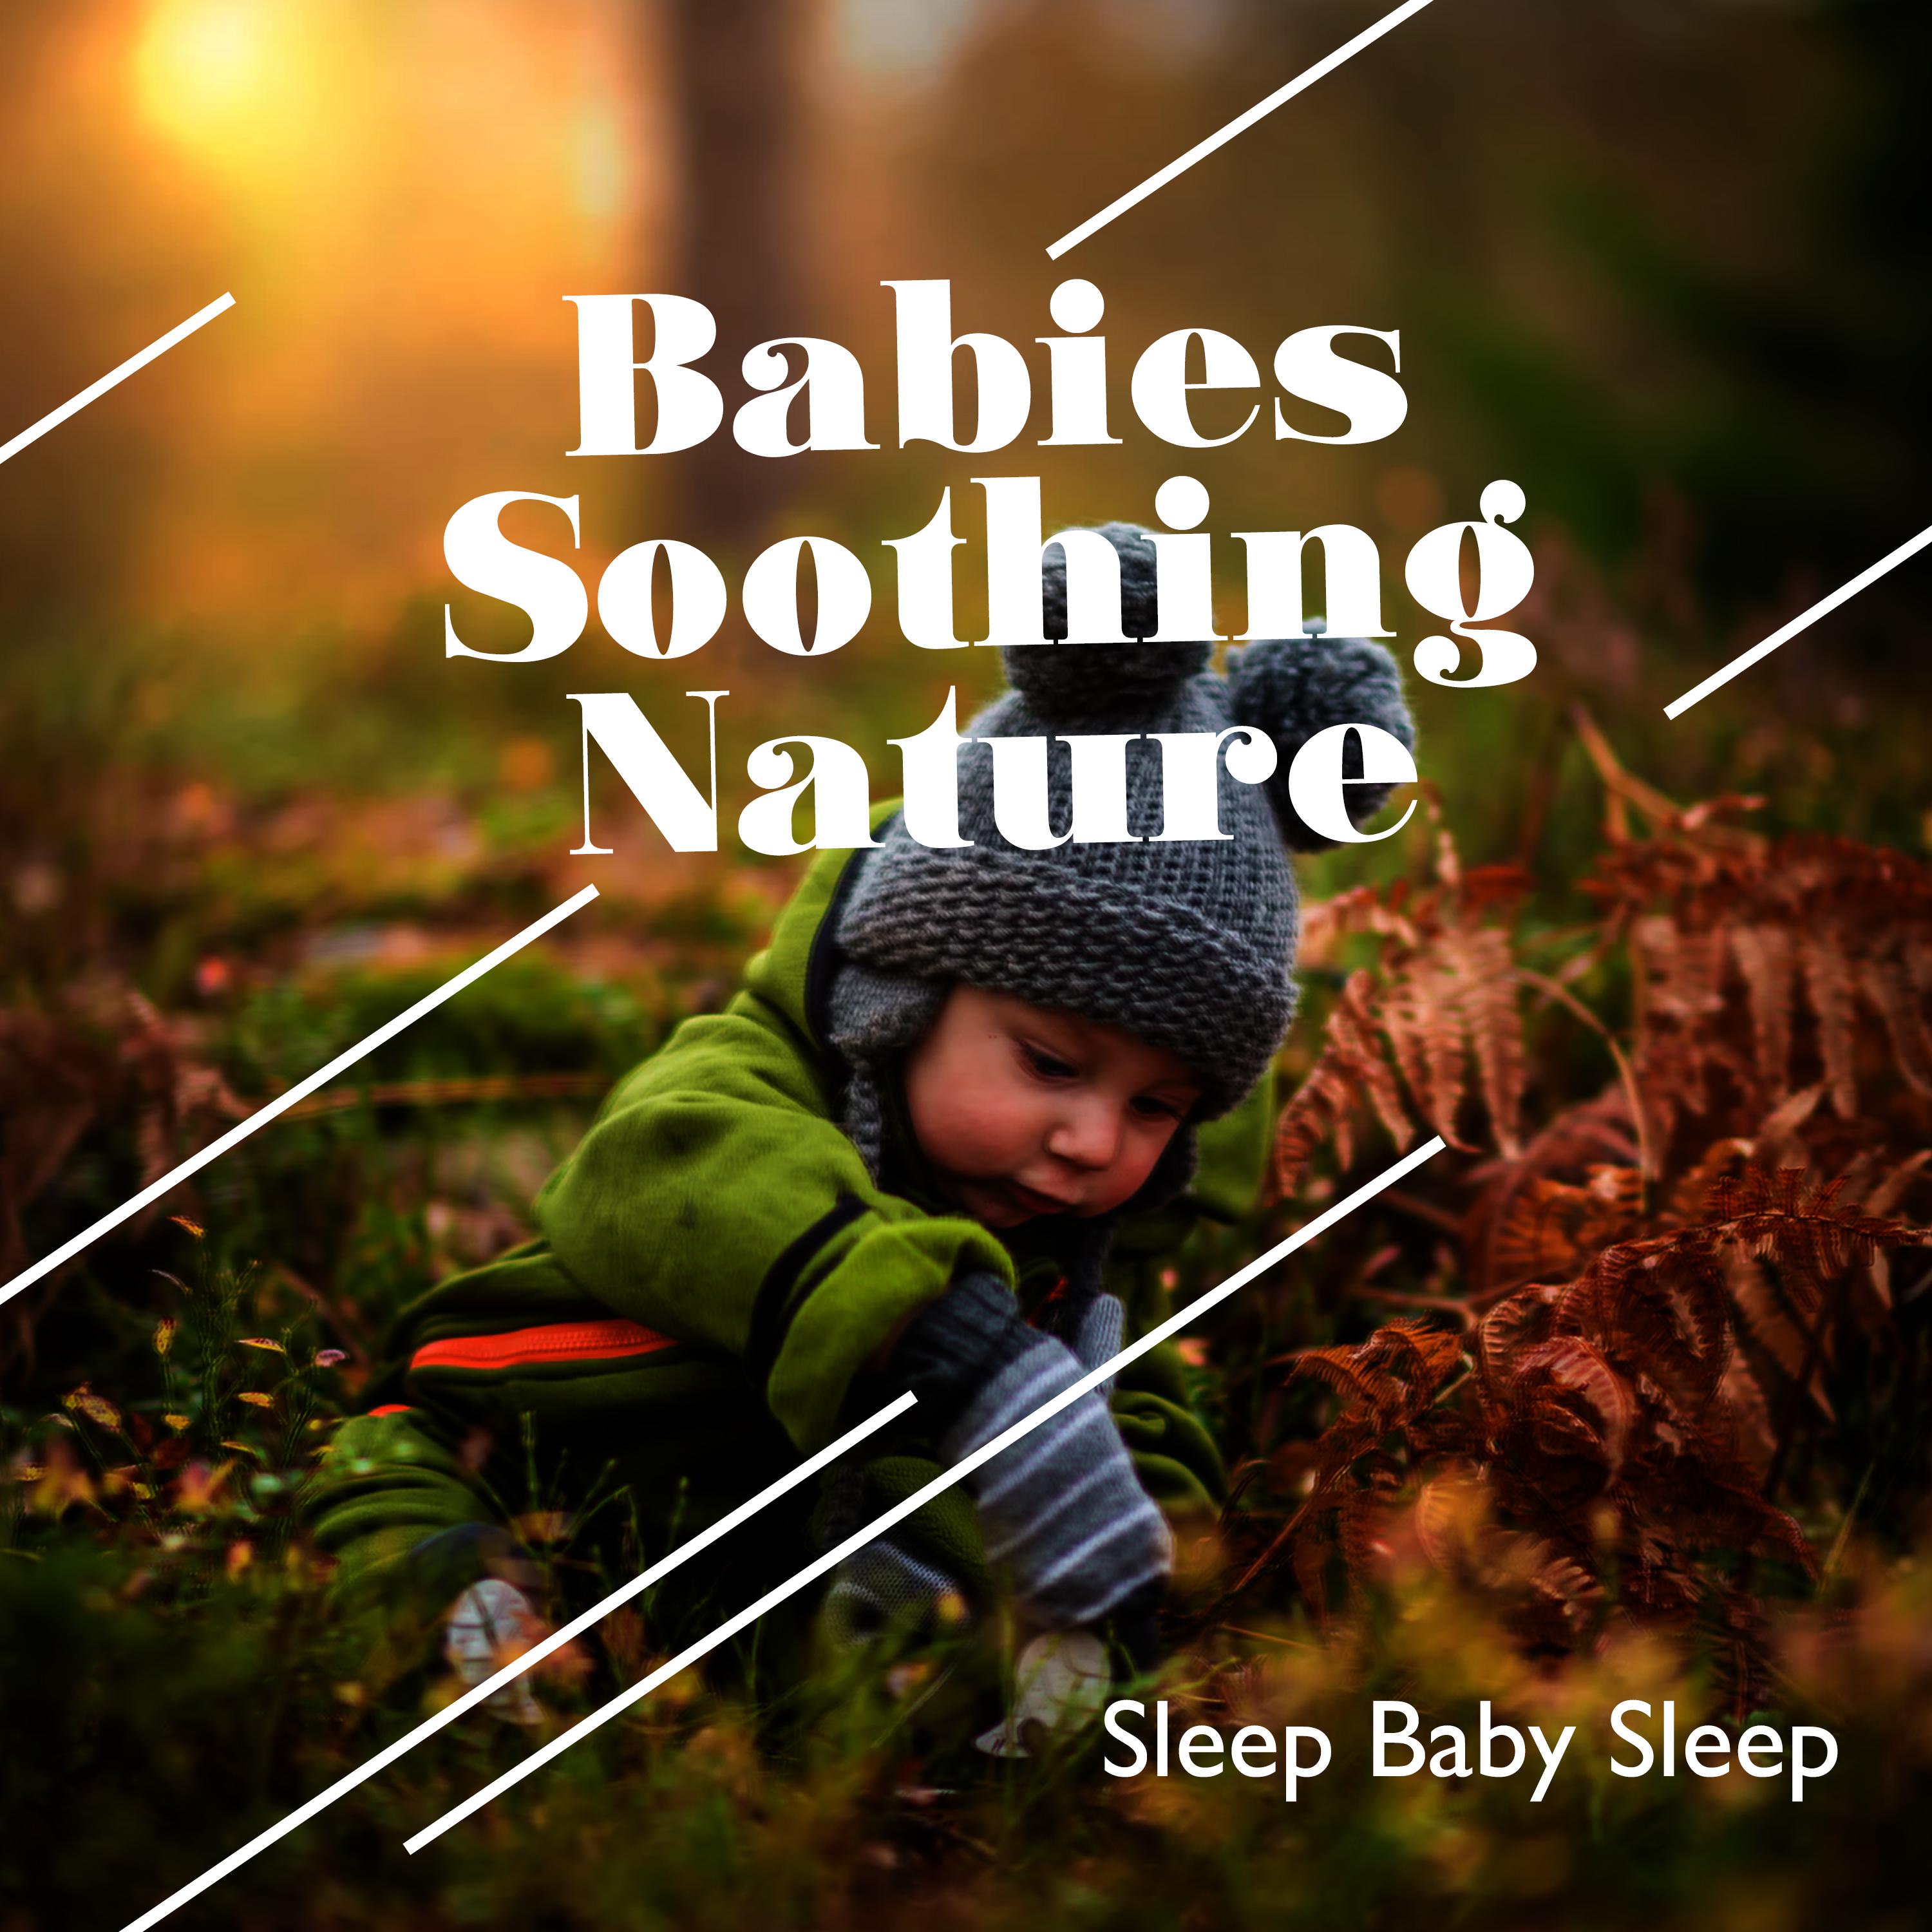 Babies Soothing Nature